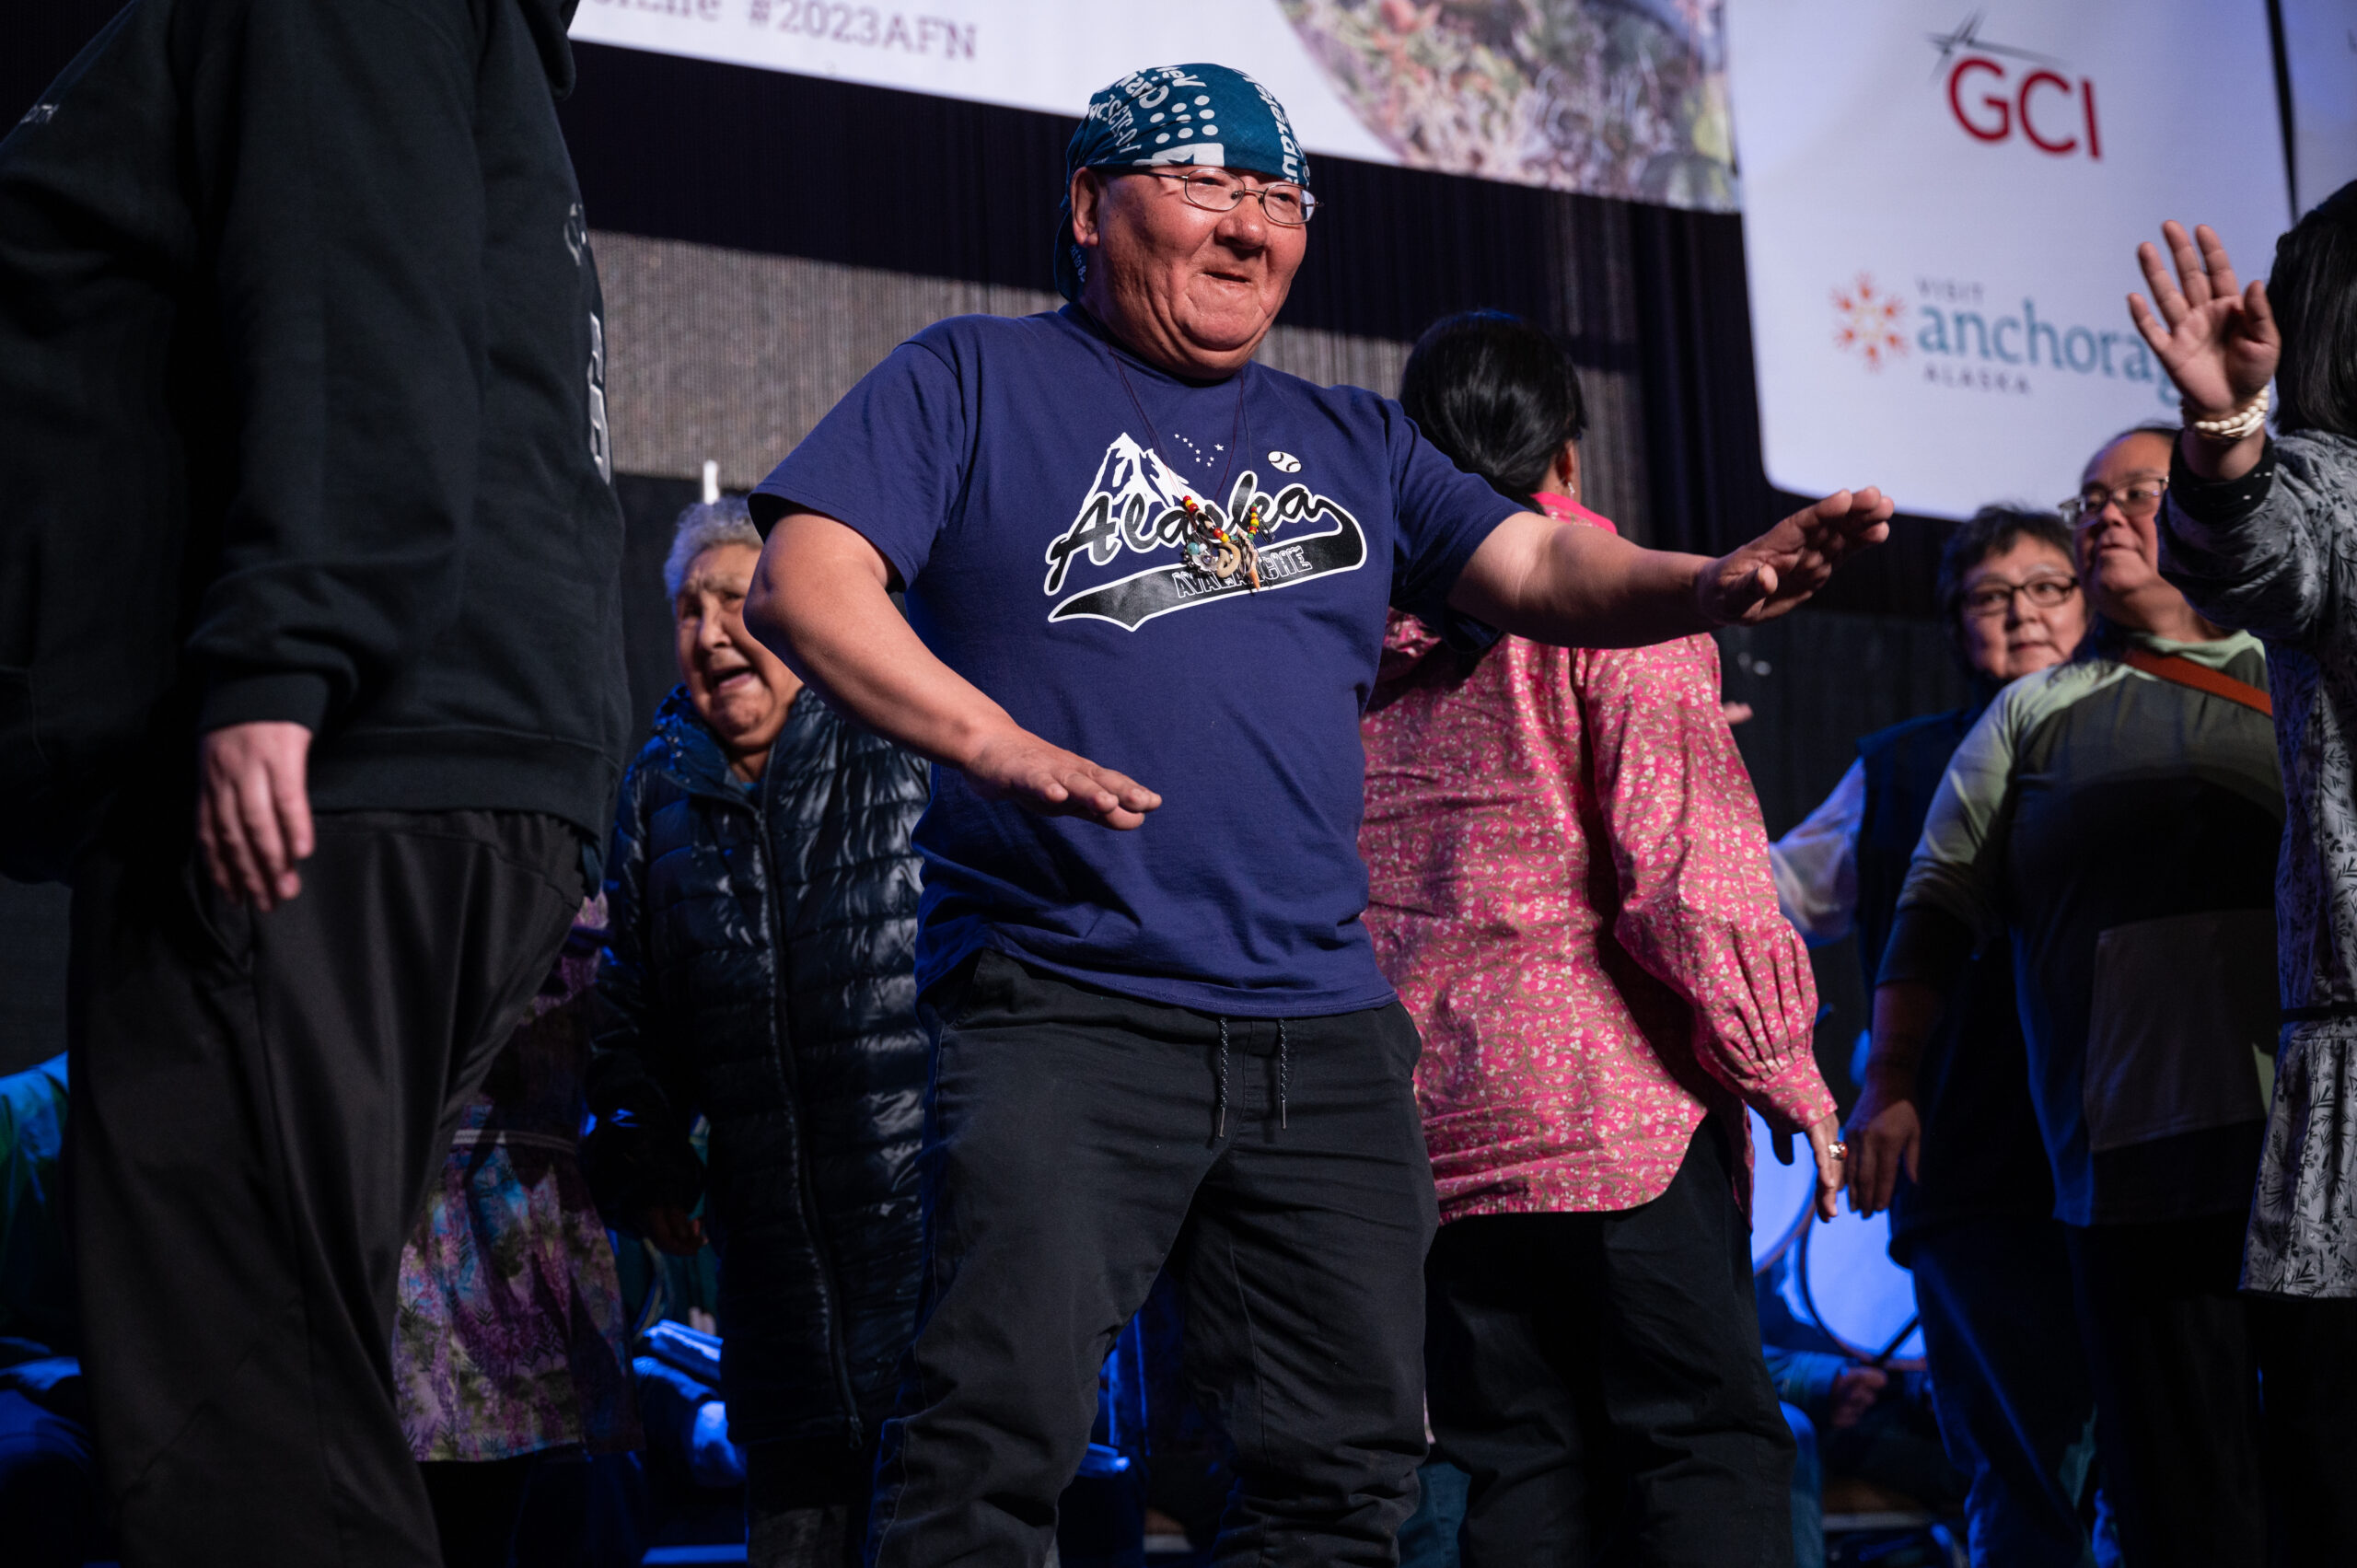 a man with a bandana on his head dances on stage with a group of Alaska Native Dancers.